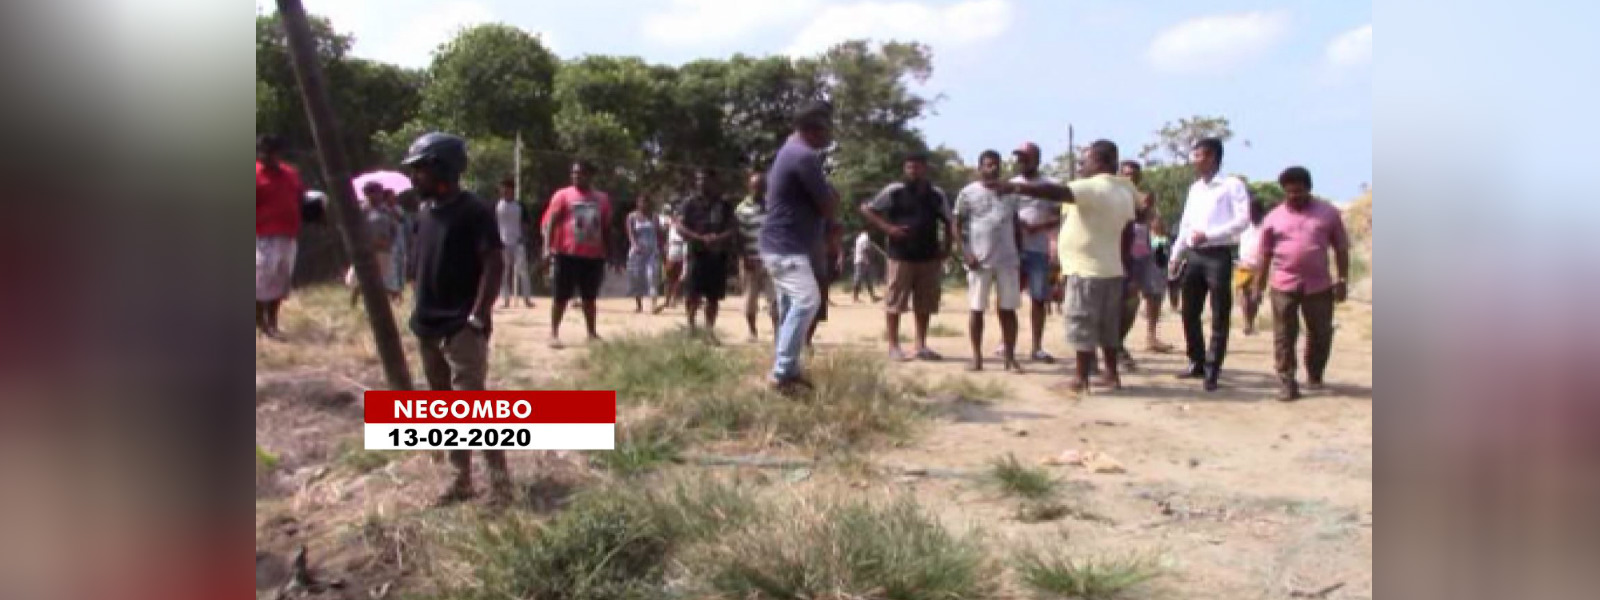 Residents protest for the playground in Negombo